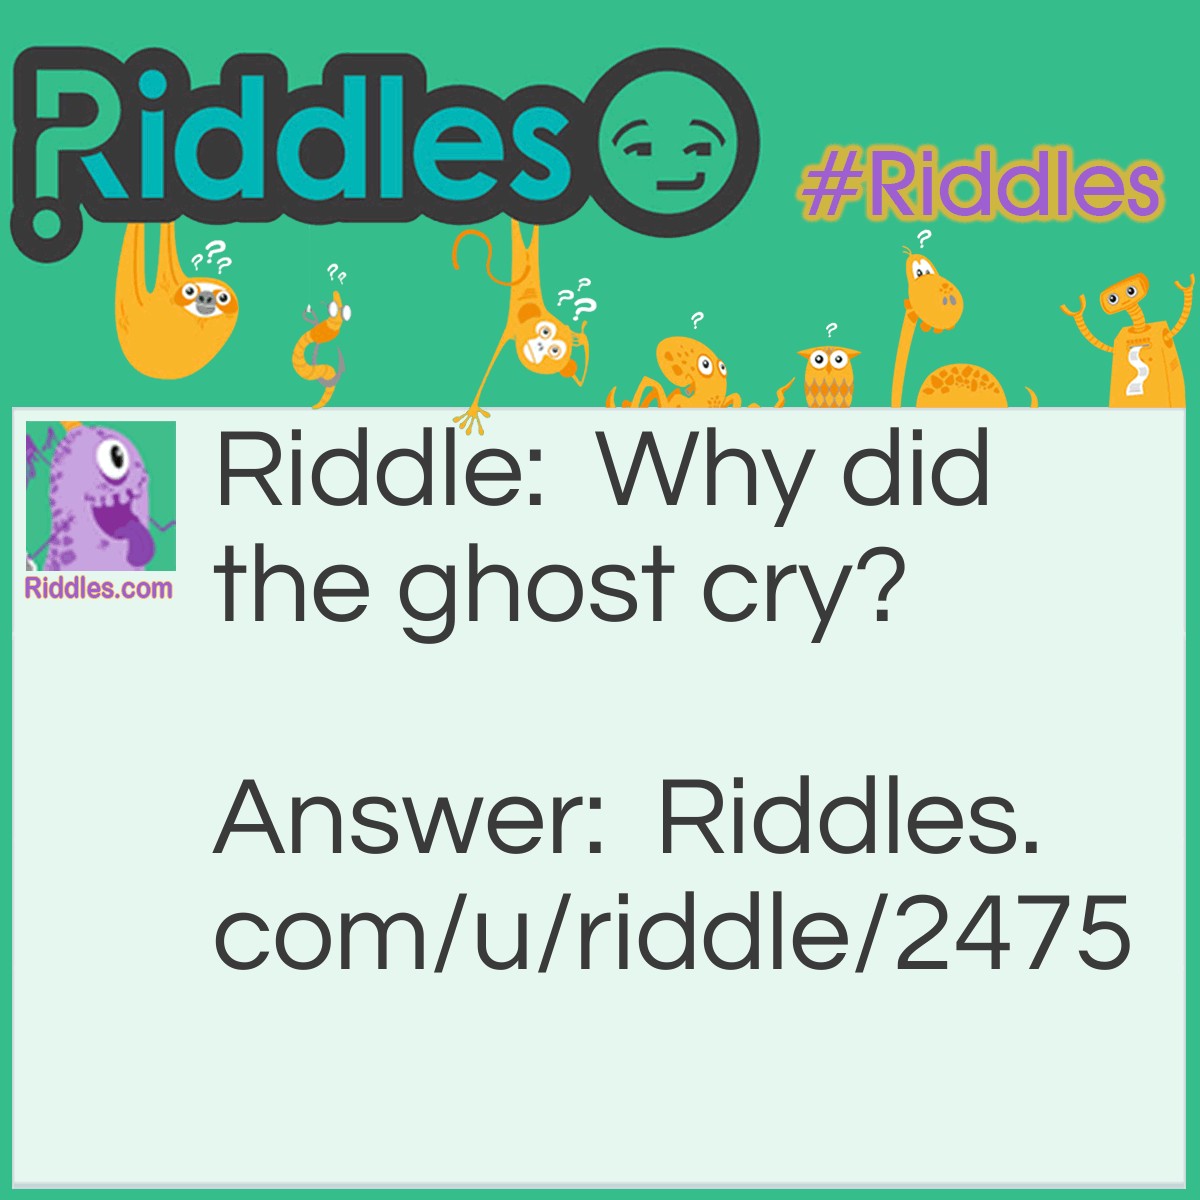 Riddle: Why did the ghost cry? Answer: He had a booboo.